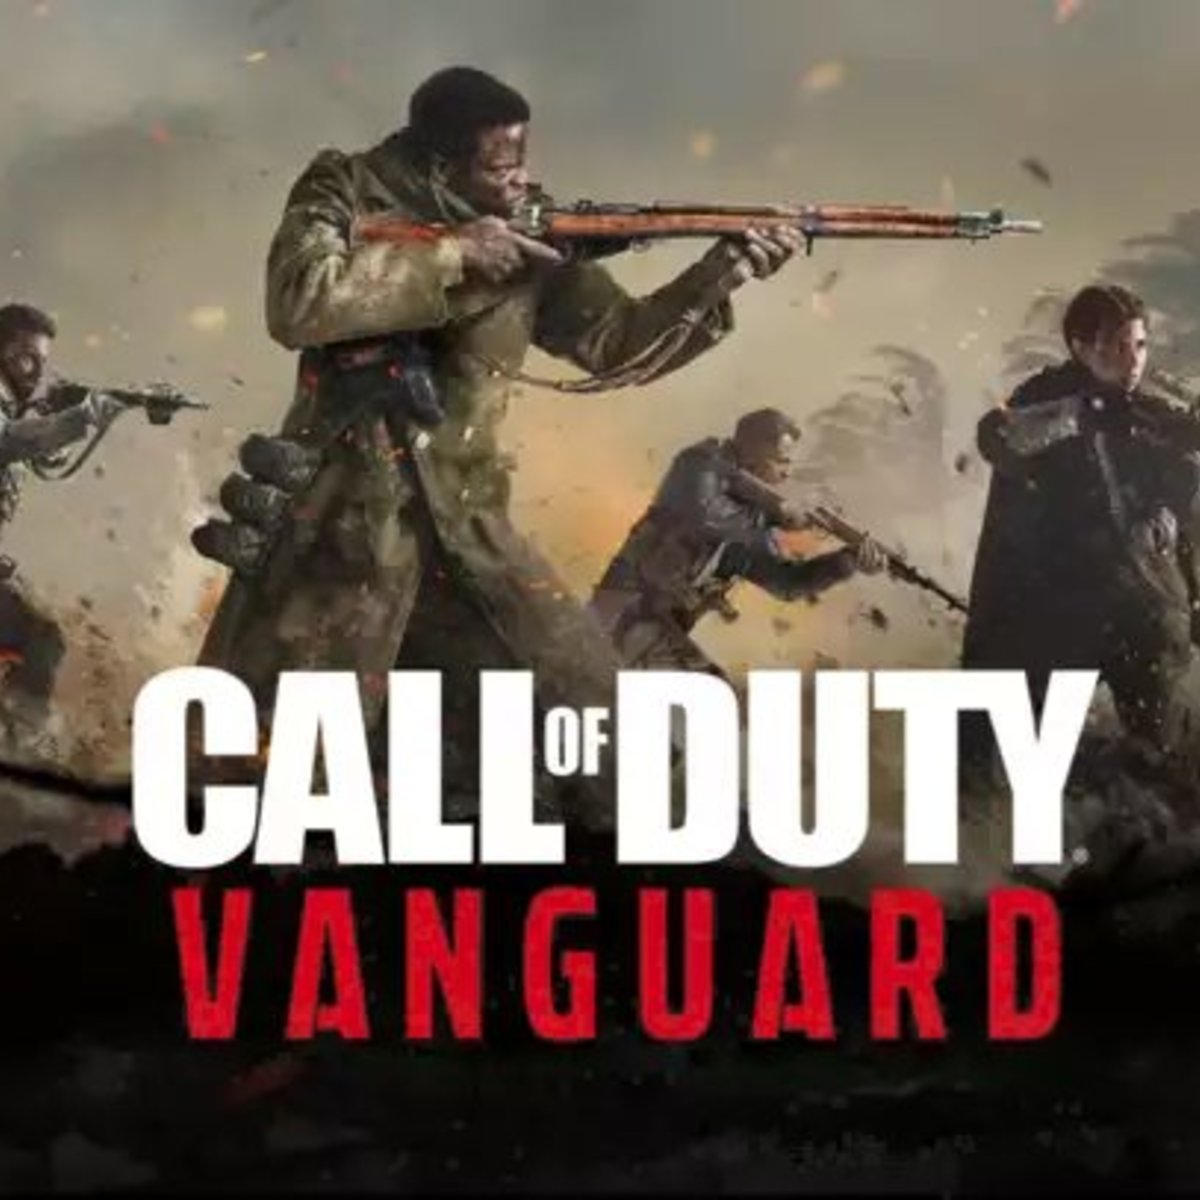 Leaked image seem to confirm WW2 setting for Call Of Duty: Vanguard. Rock Paper Shotgun